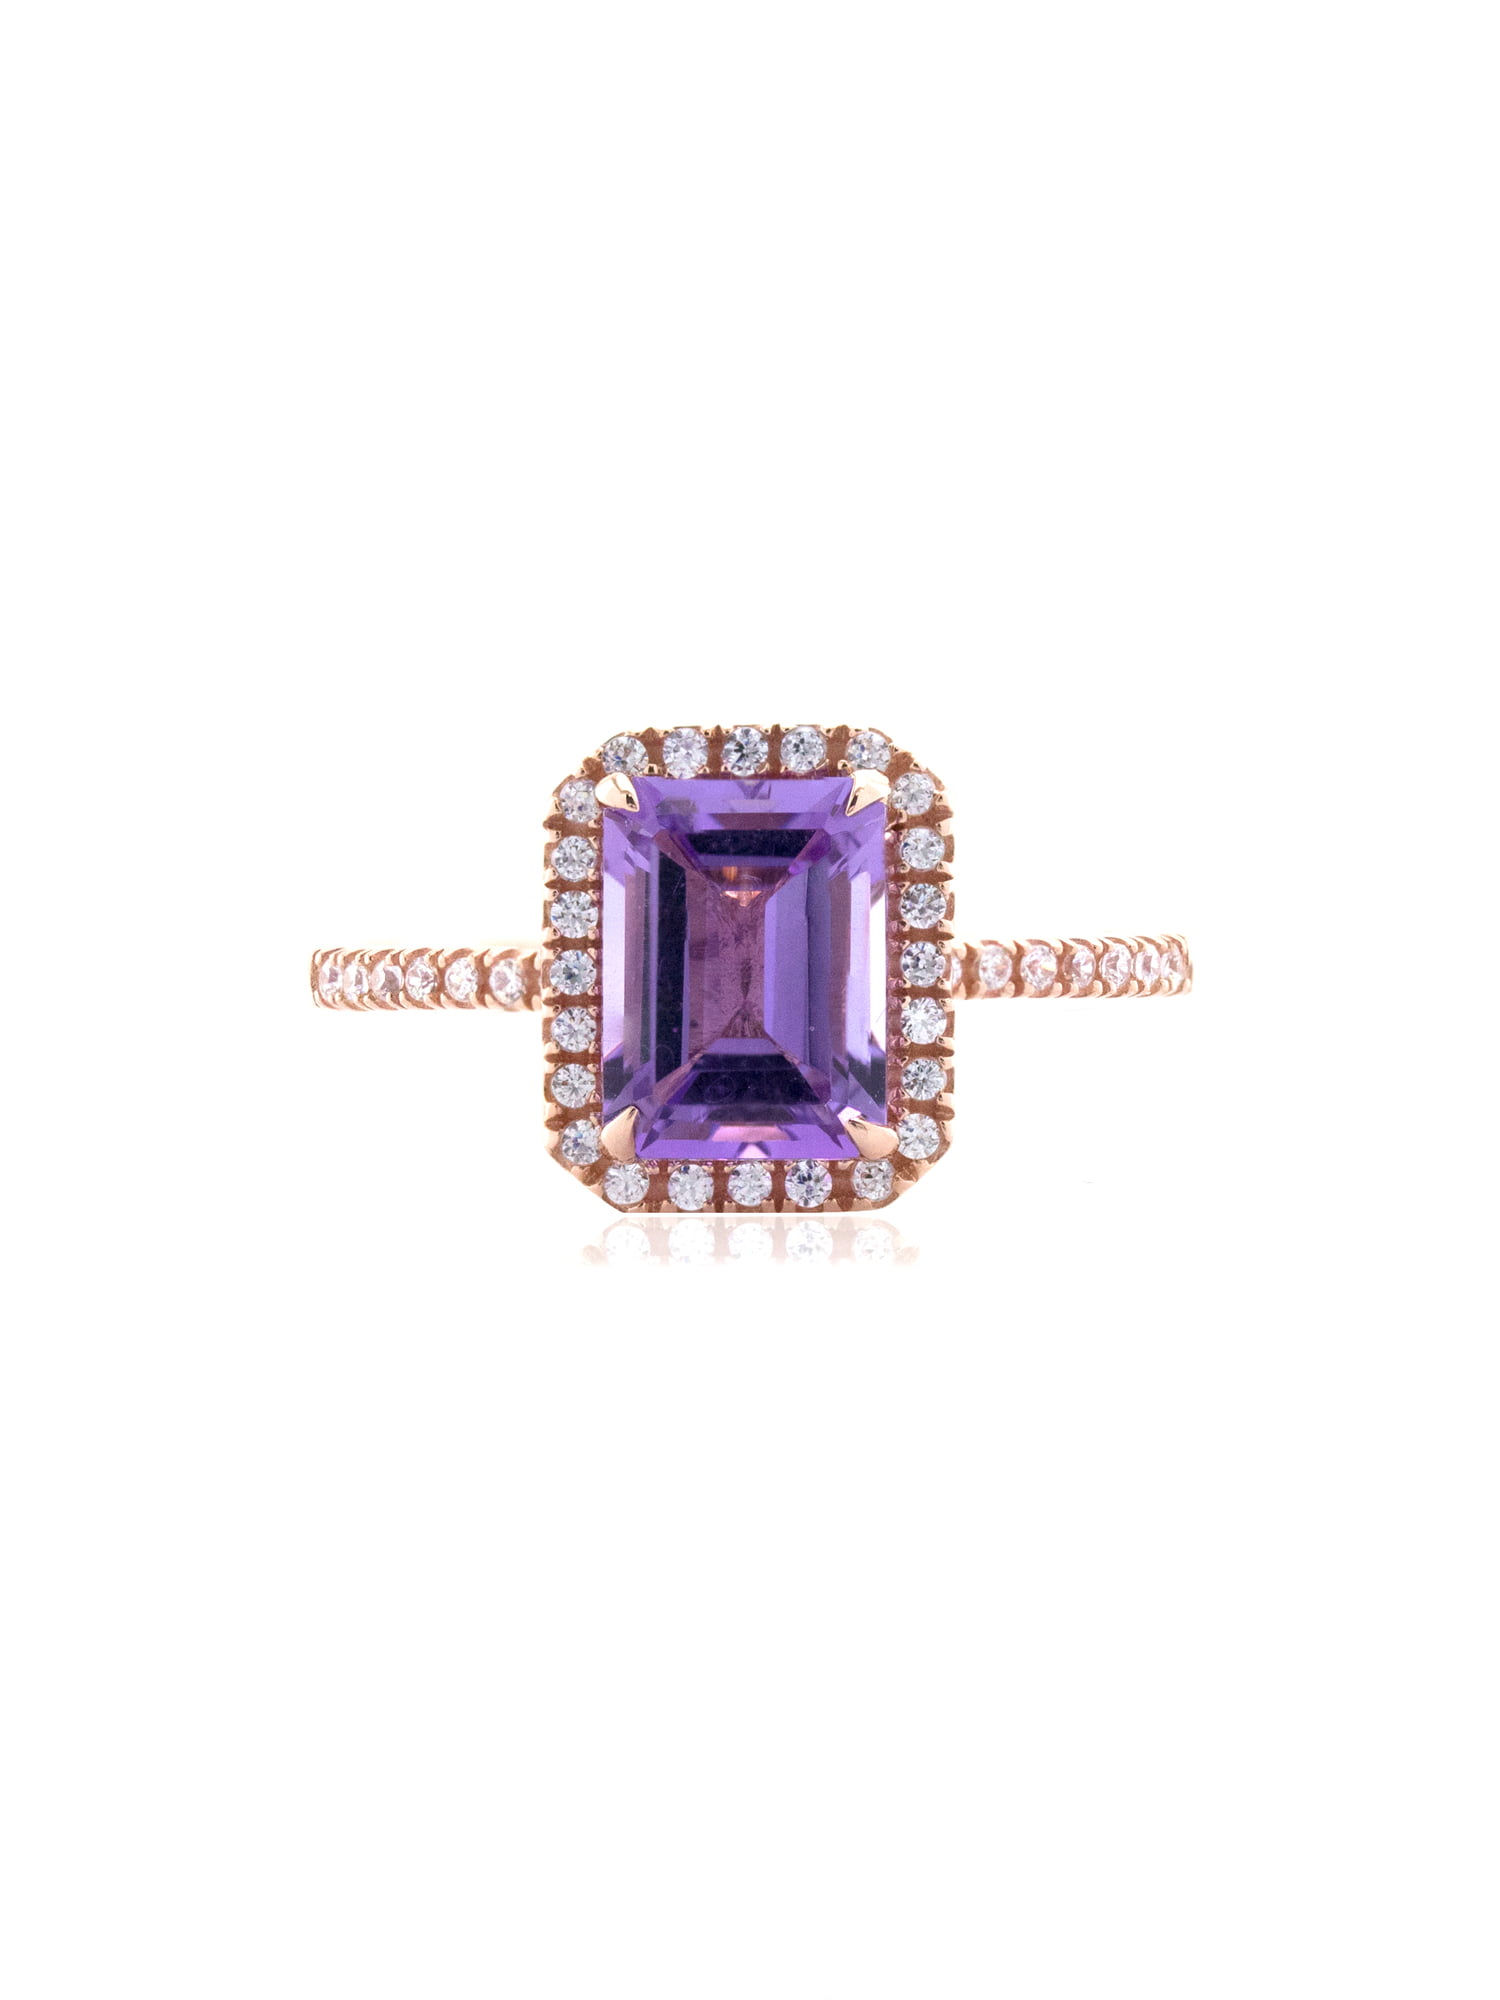 3.5 CT LAB Amethyst Antique Style 925 Sterling Silver Ring Size 7 KN-515